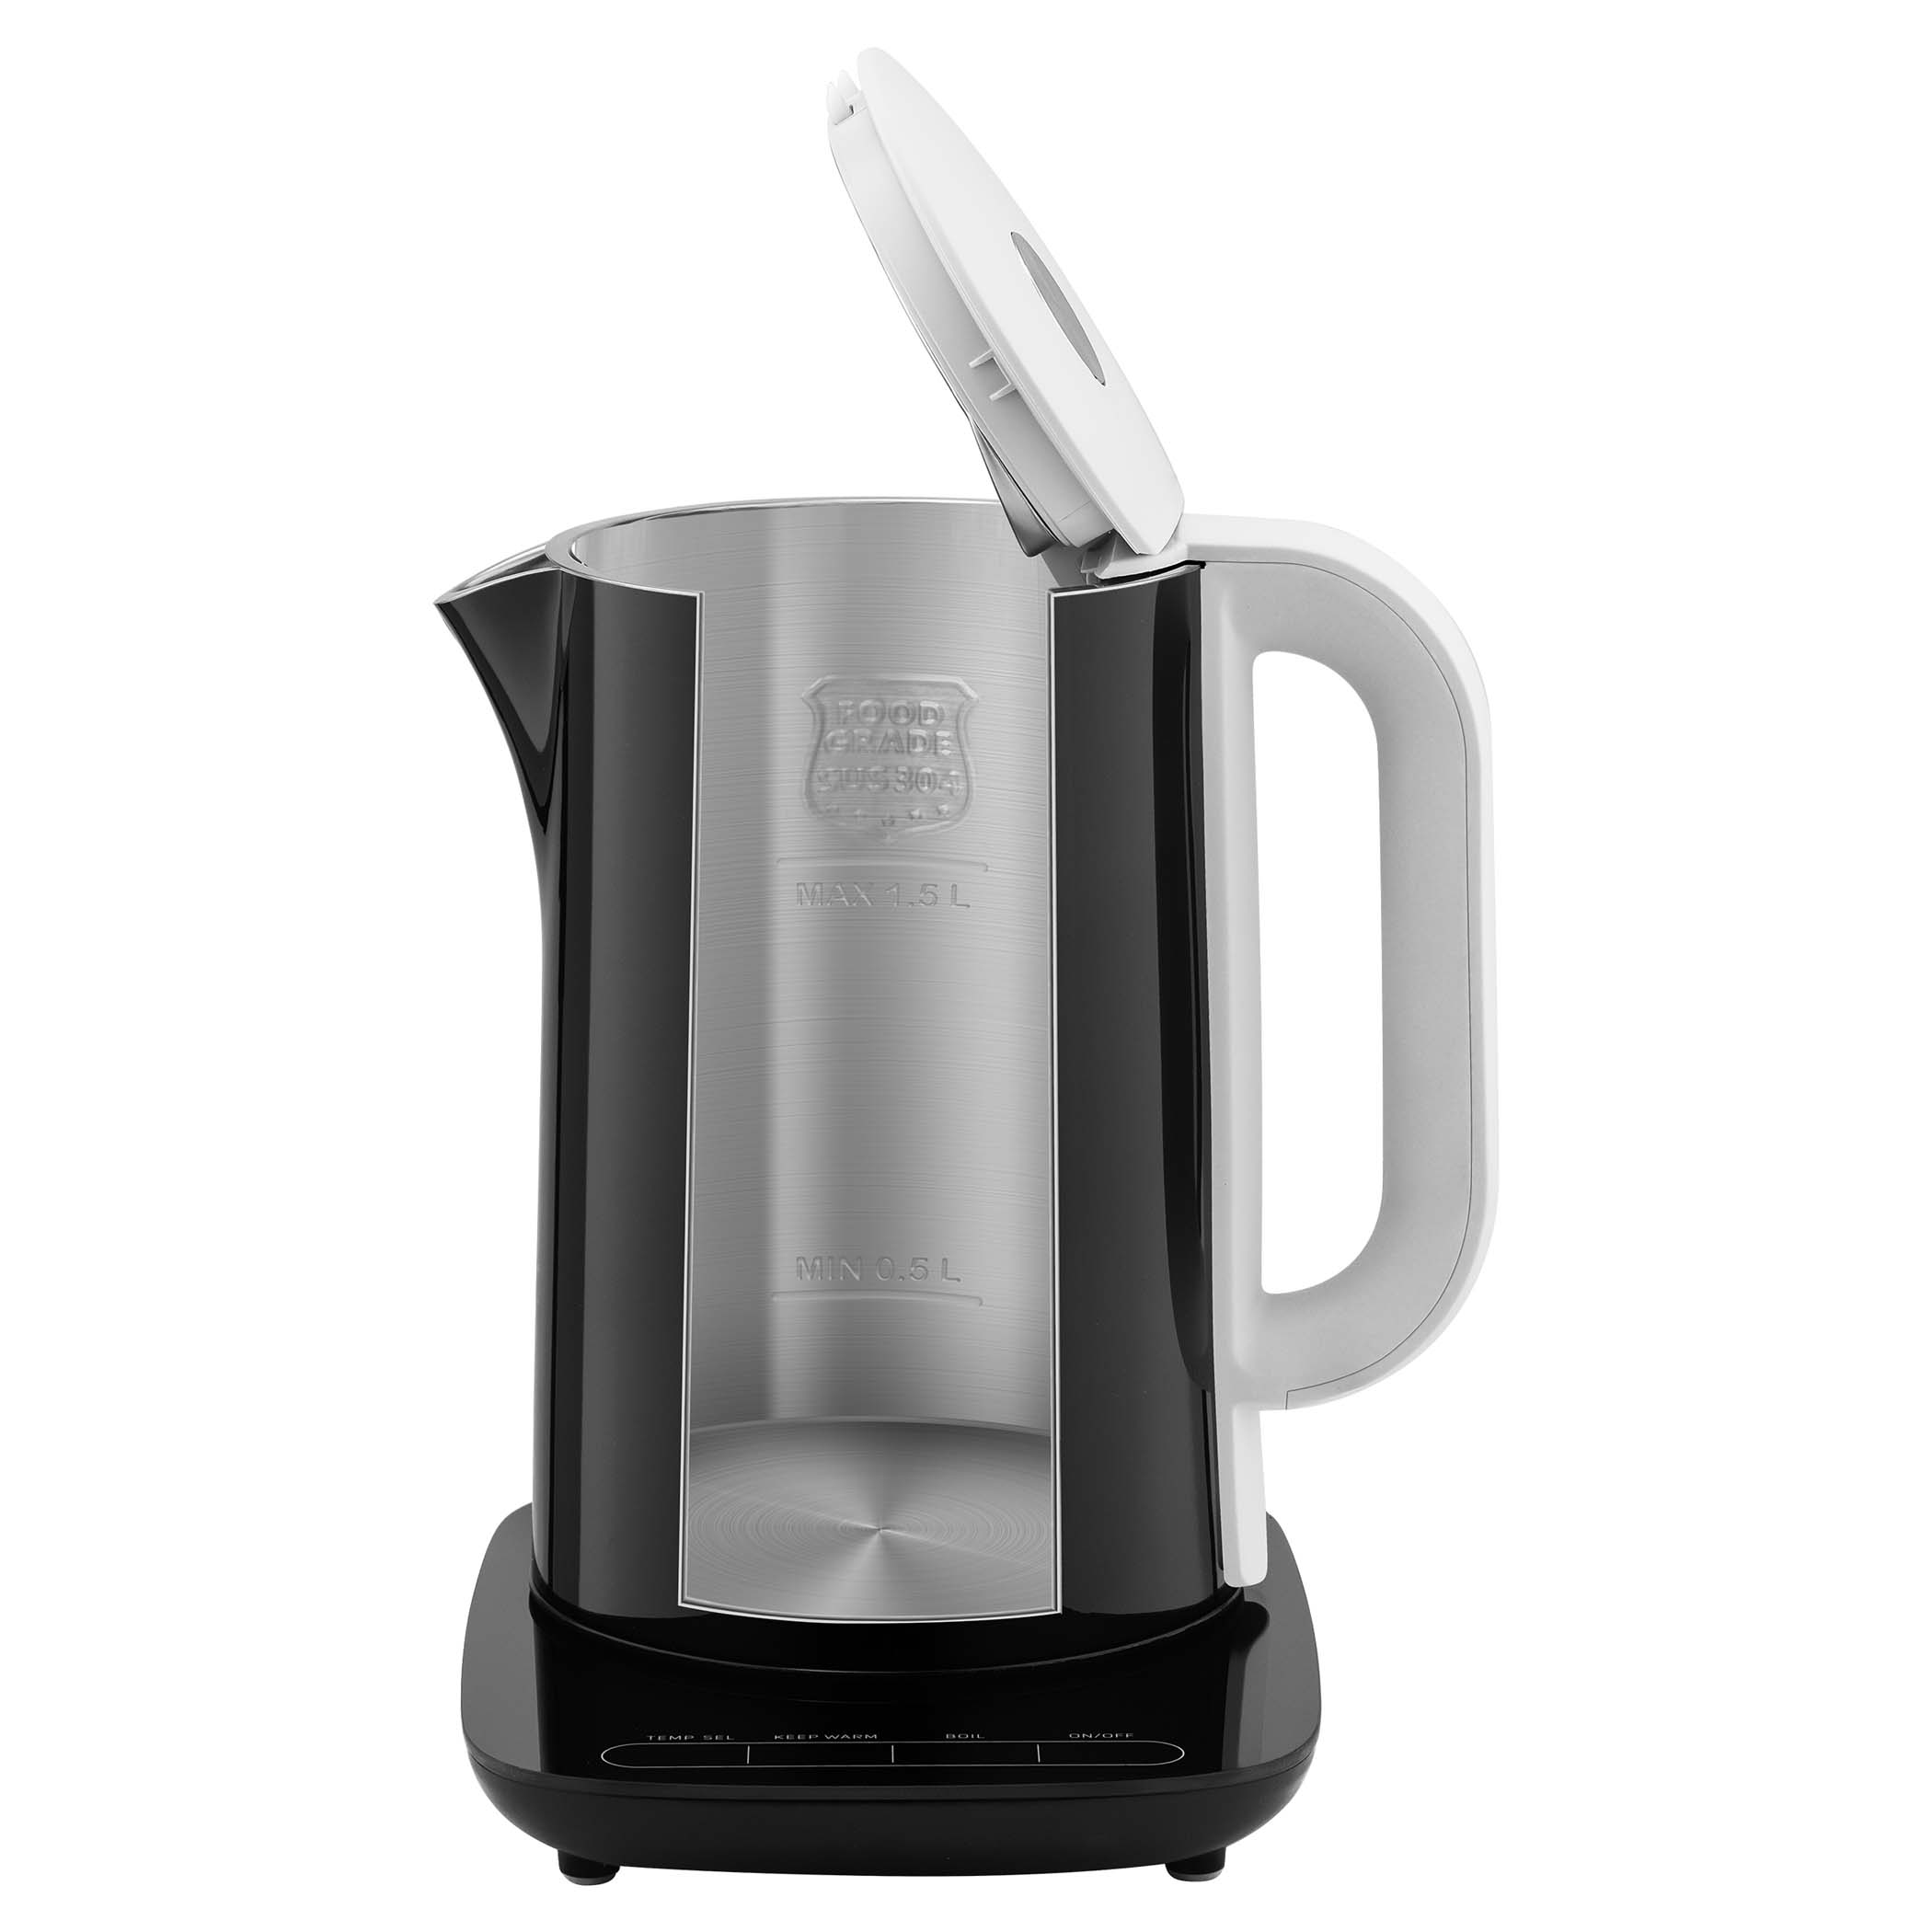 Double Wall Variable Temperature Electric Kettle, SWK 1592BK